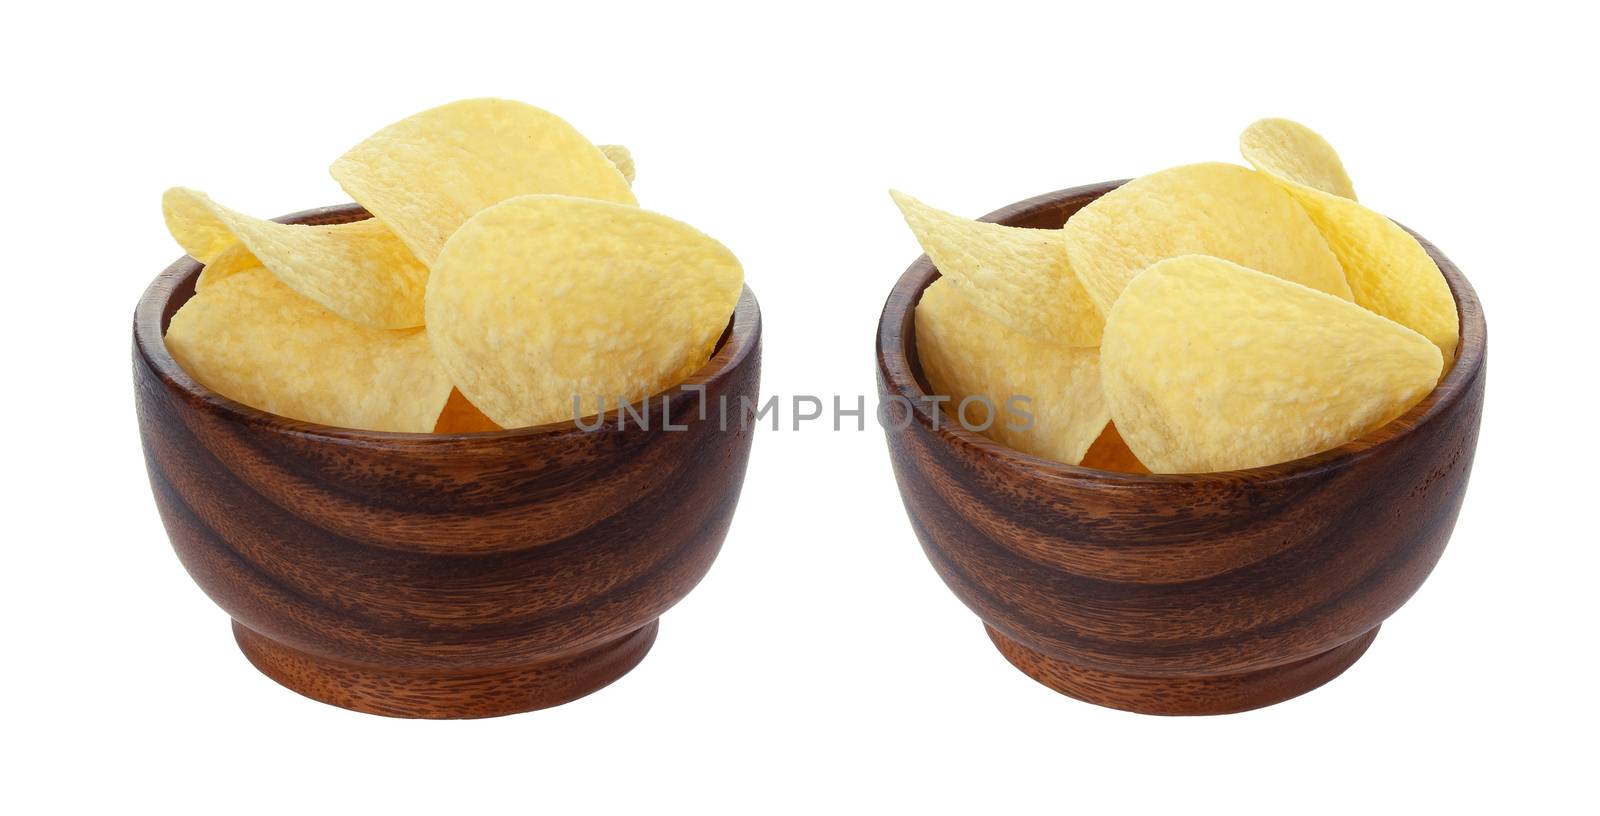 Potato chips in wooden bowl isolated on white background by xamtiw